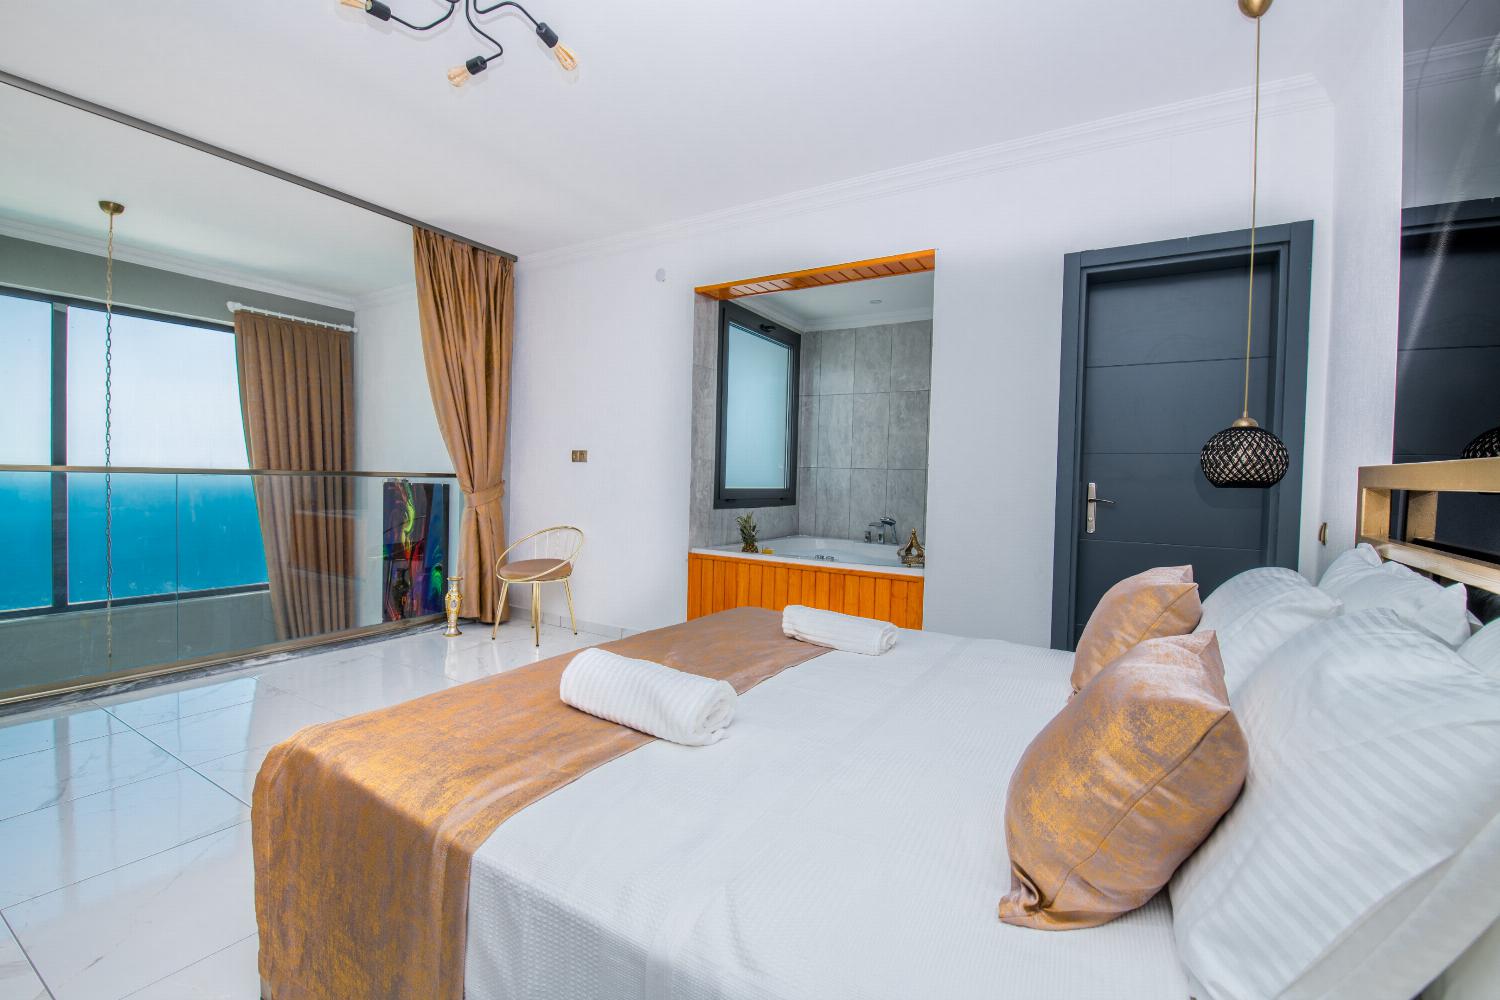 Double bedroom with en suite bathroom, A/C, with panoramic sea views